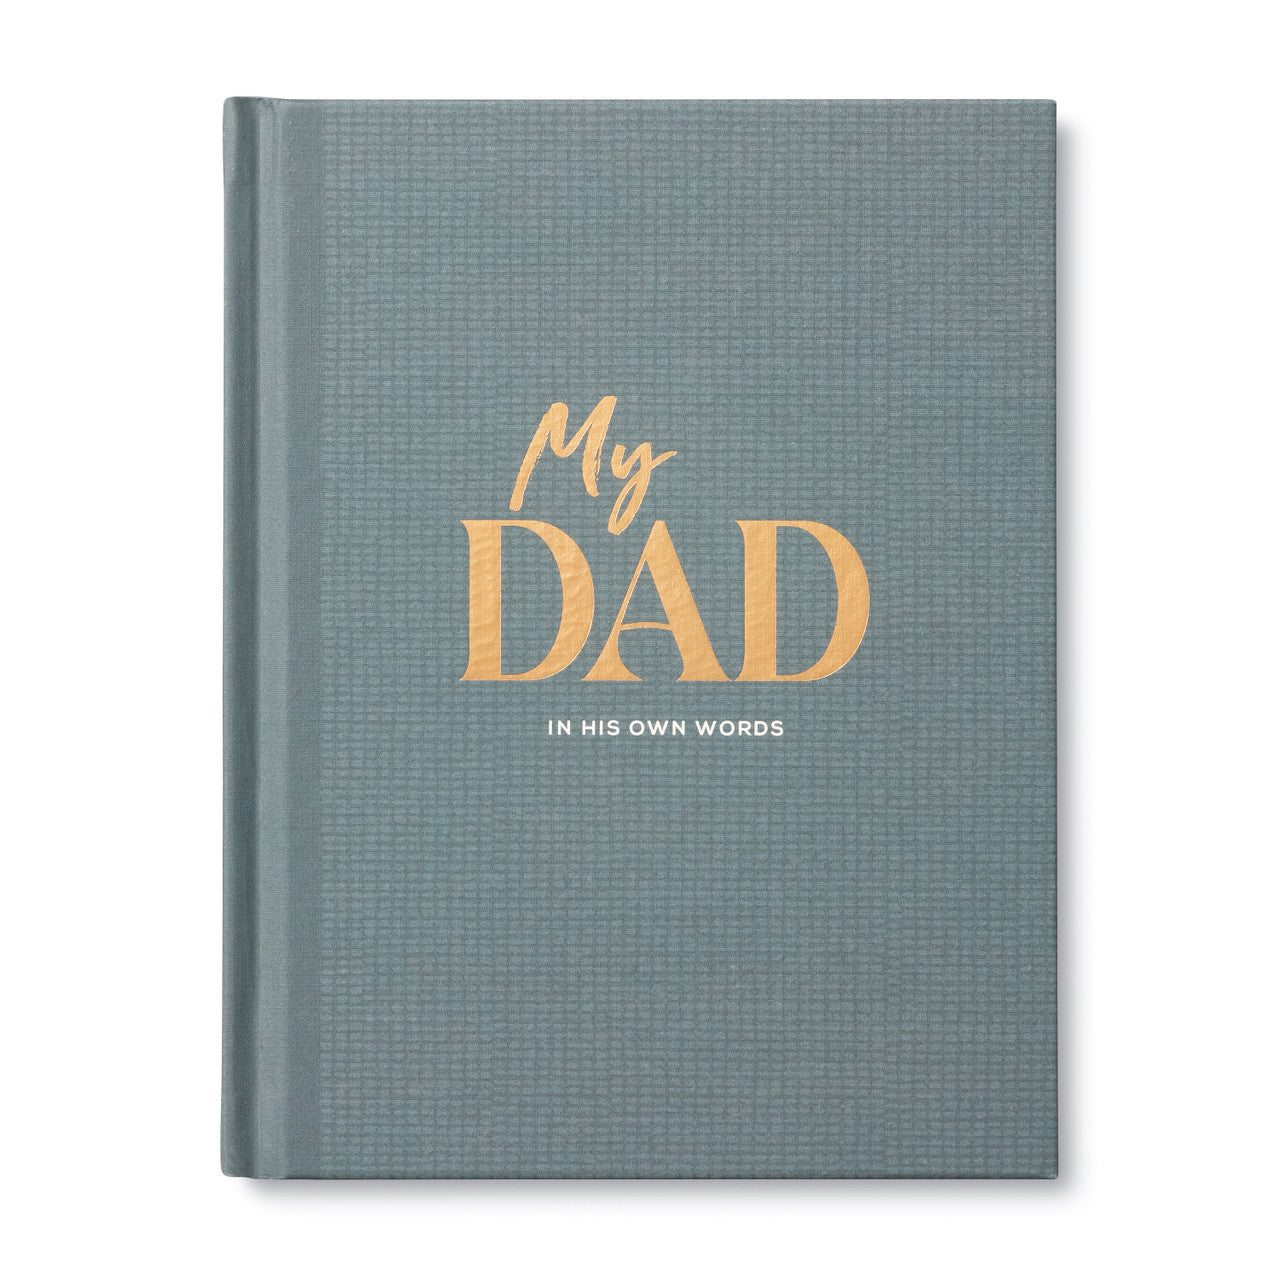 MY DAD – IN HIS OWN WORDS BOOK